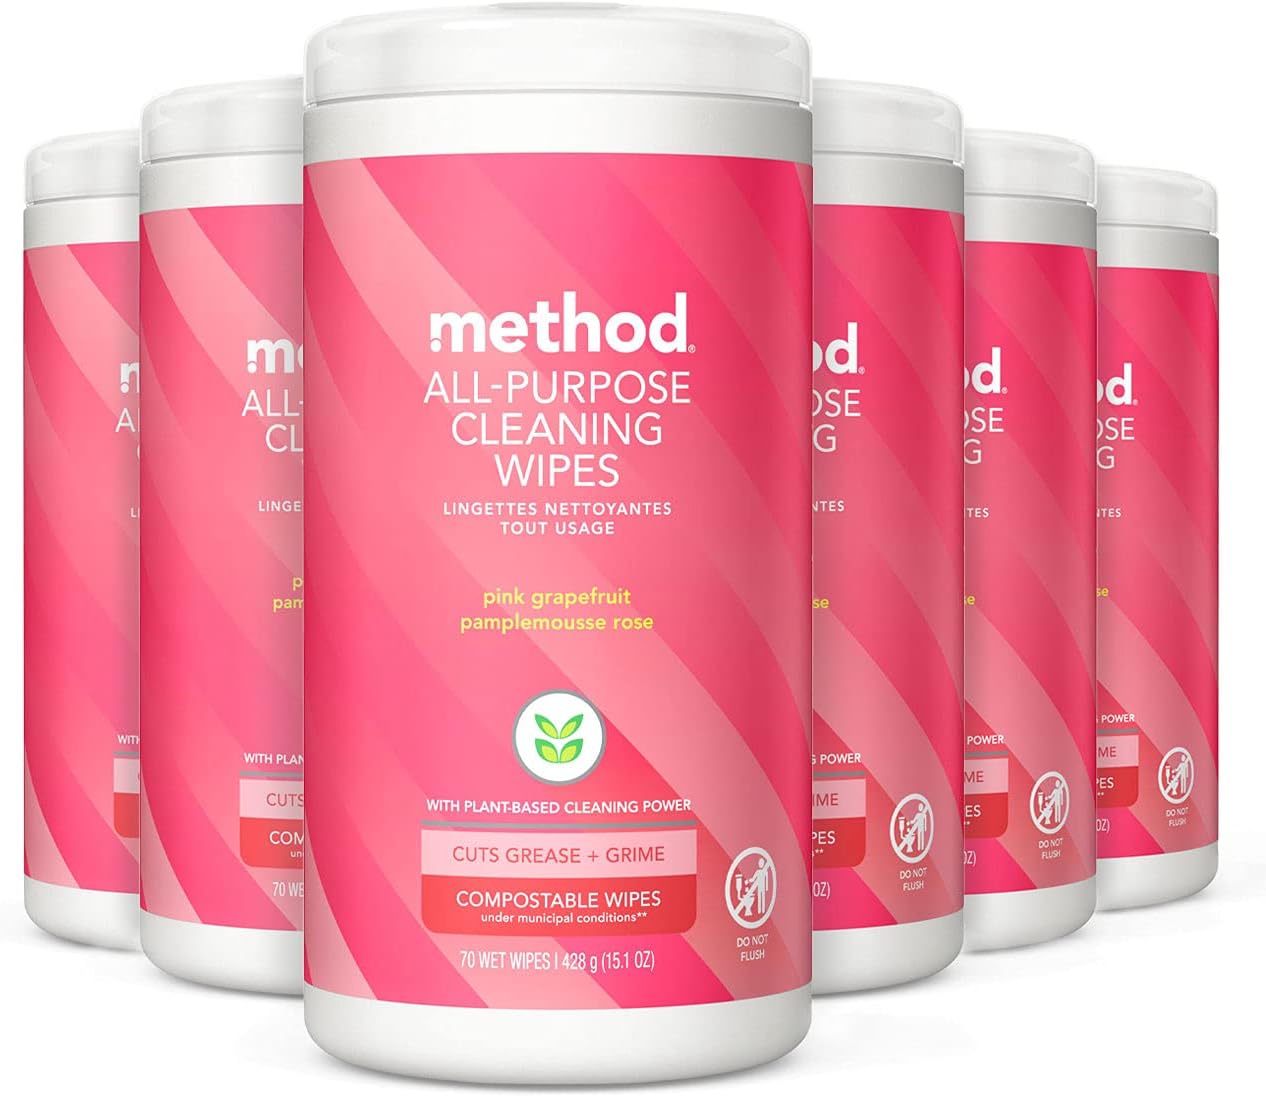 Method All-Purpose Cleaning Wipes, Pink Grapefruit, Multi-Surface, Compostable, 70 Count (Pack of 6)